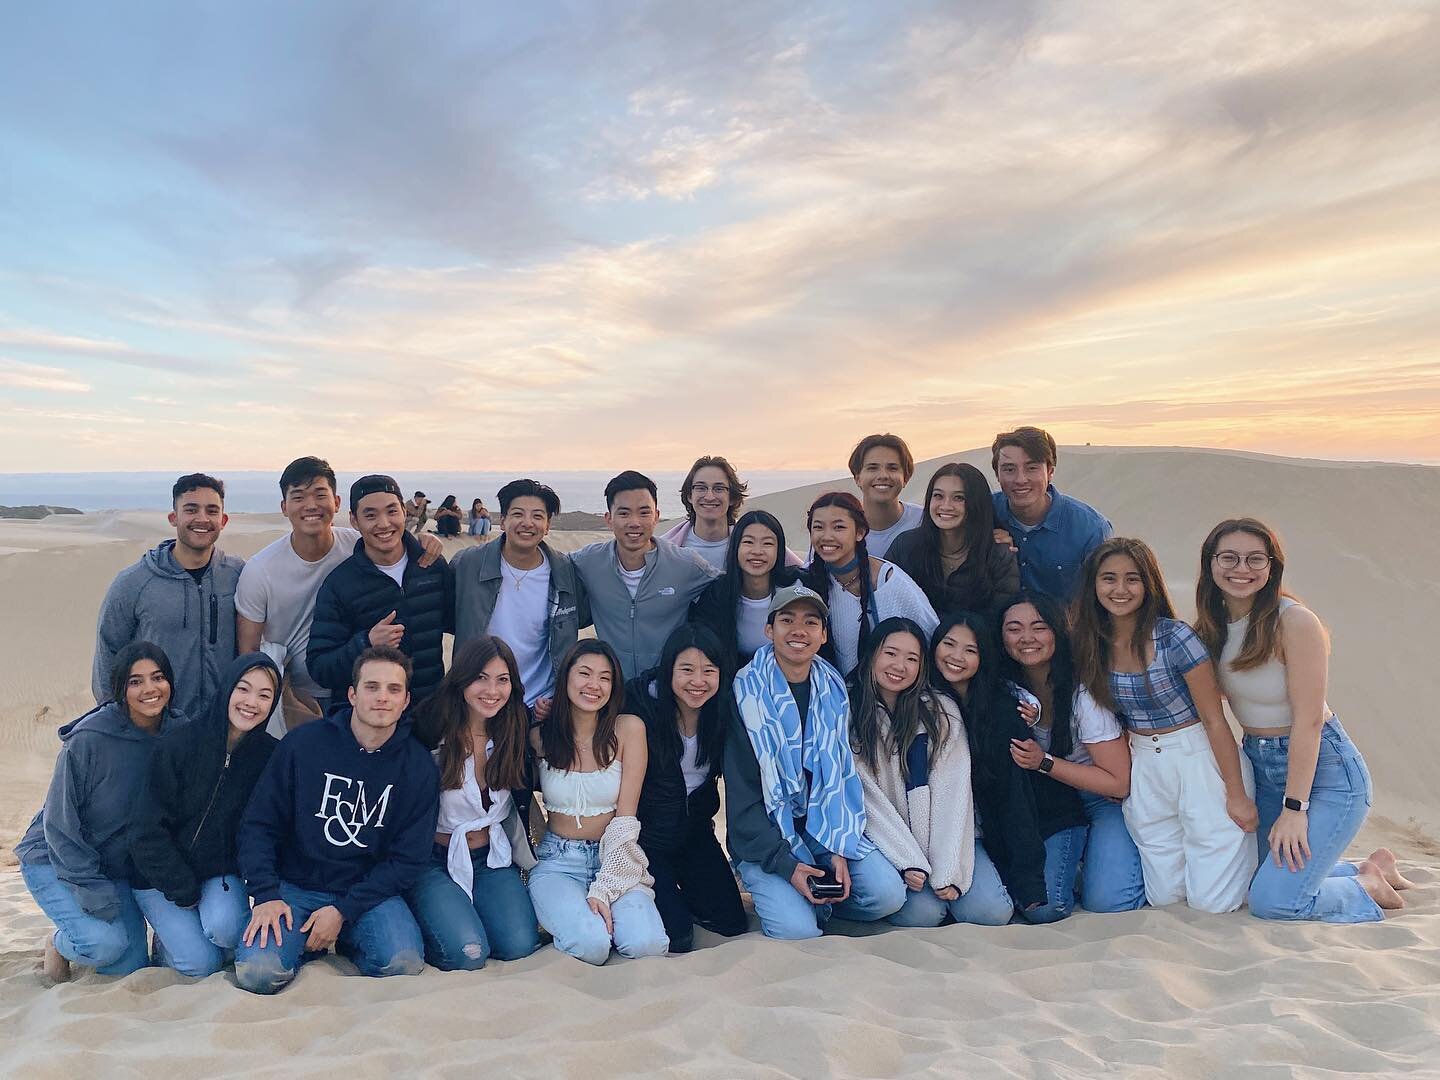 Recap of Brotherhood Week! Our brothers spent last week bonding with each other over adventures at the sand dunes, late night in n out, and fun games! Special thank you to our directors of brotherhood @jazziele @appatrice for organizing such a fun we